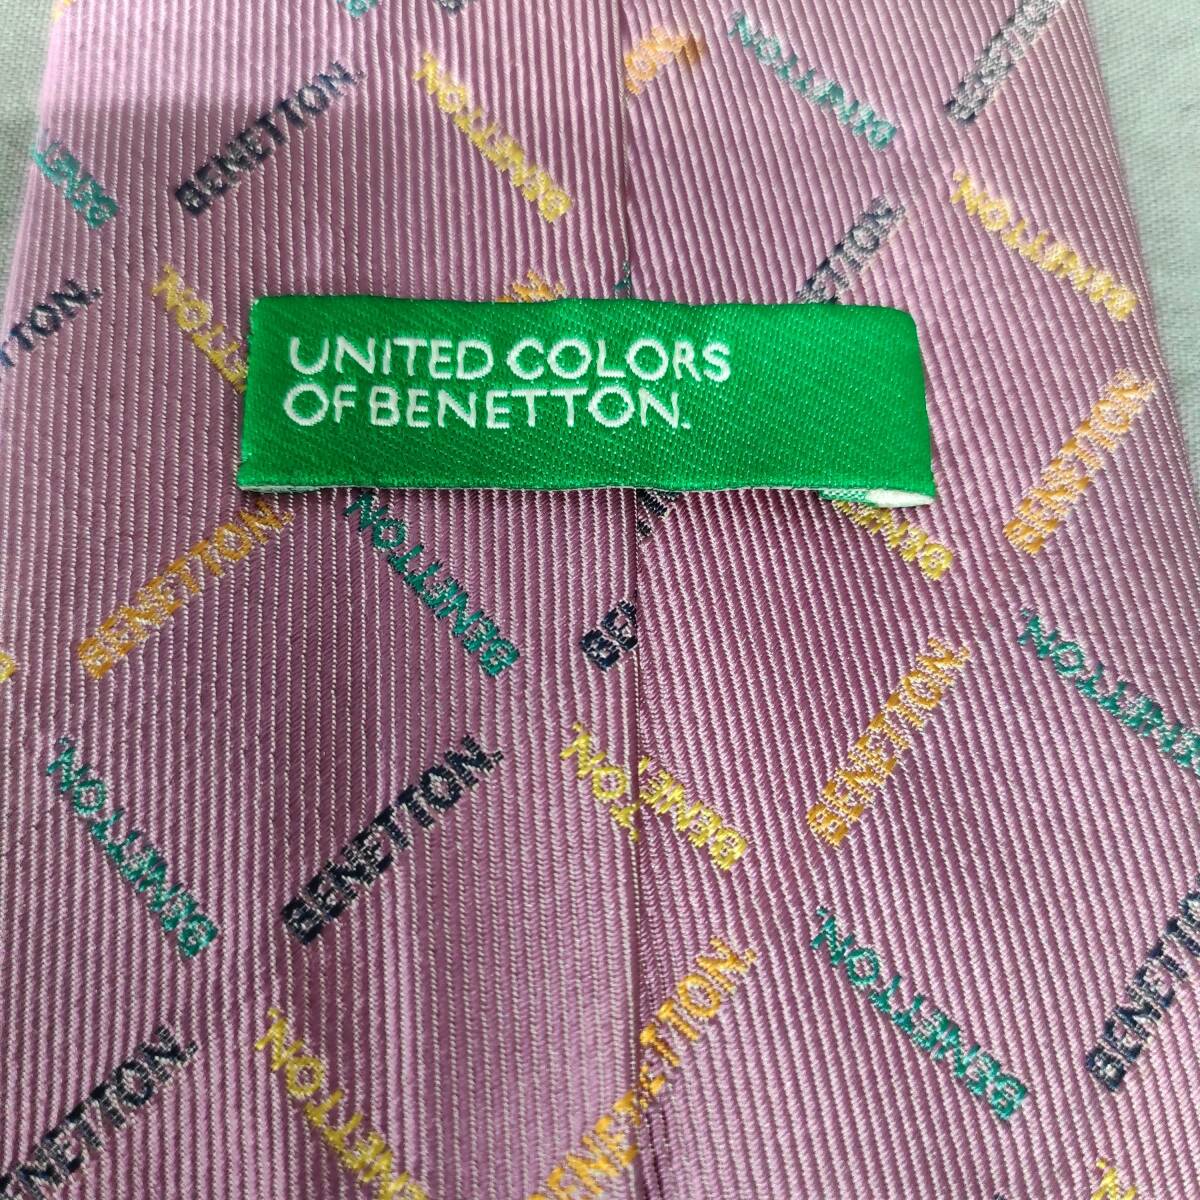 060315 259731-5 necktie UNITED COLORS OF BENETTON Benetton purple series pattern thing accessory suit small articles clothing accessories USED goods 